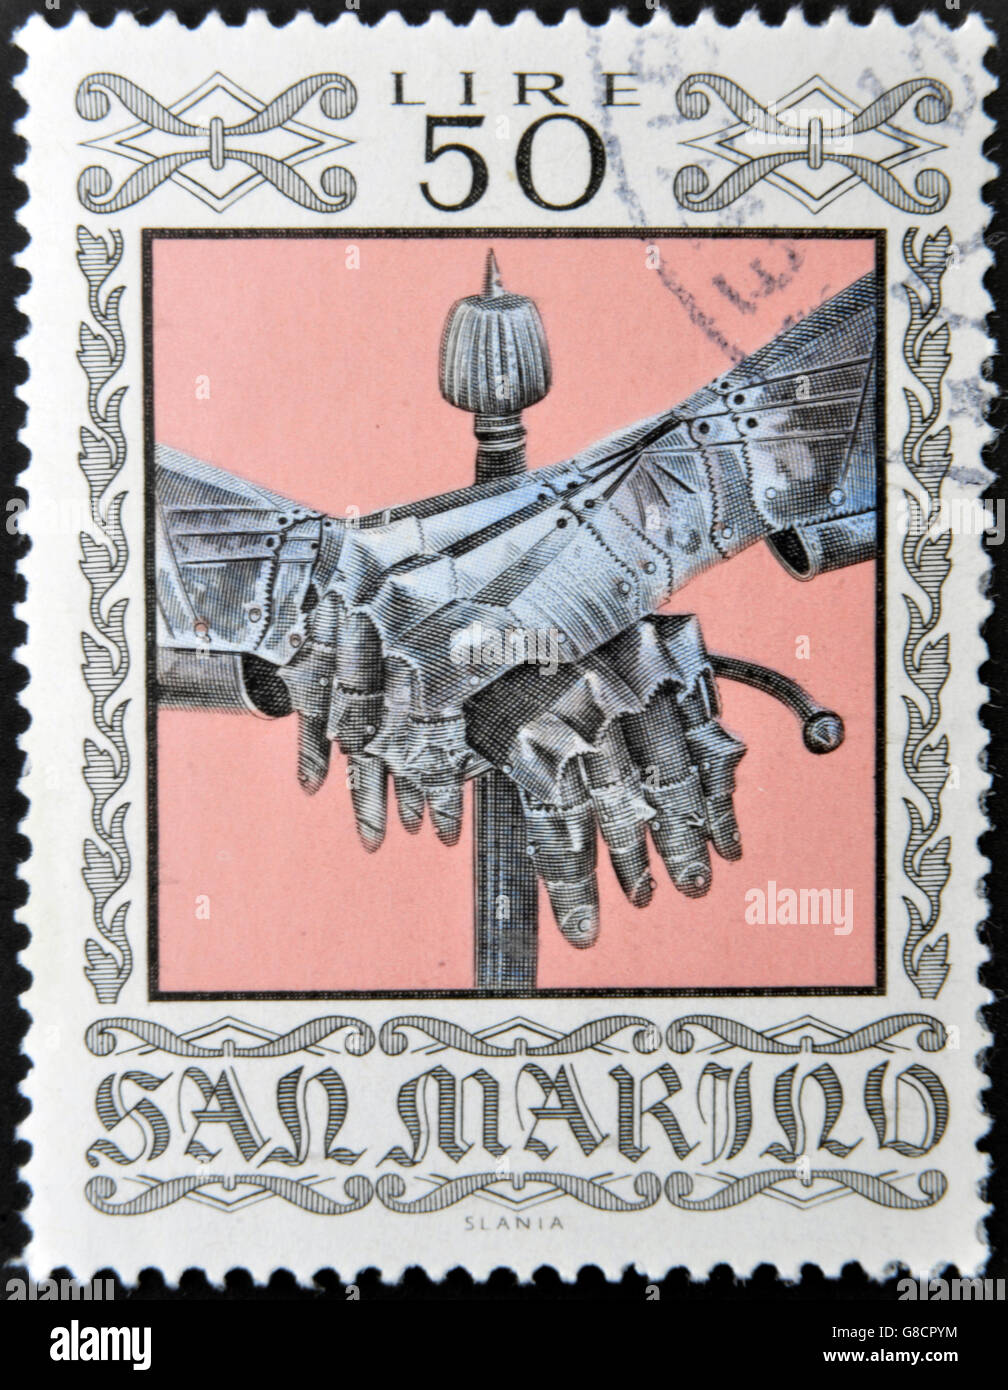 SAN MARINO - CIRCA 1974: A stamp printed in San Marino dedicated to Ancient Weapons from Cesta Museum, shows Gauntlets and Sword Stock Photo